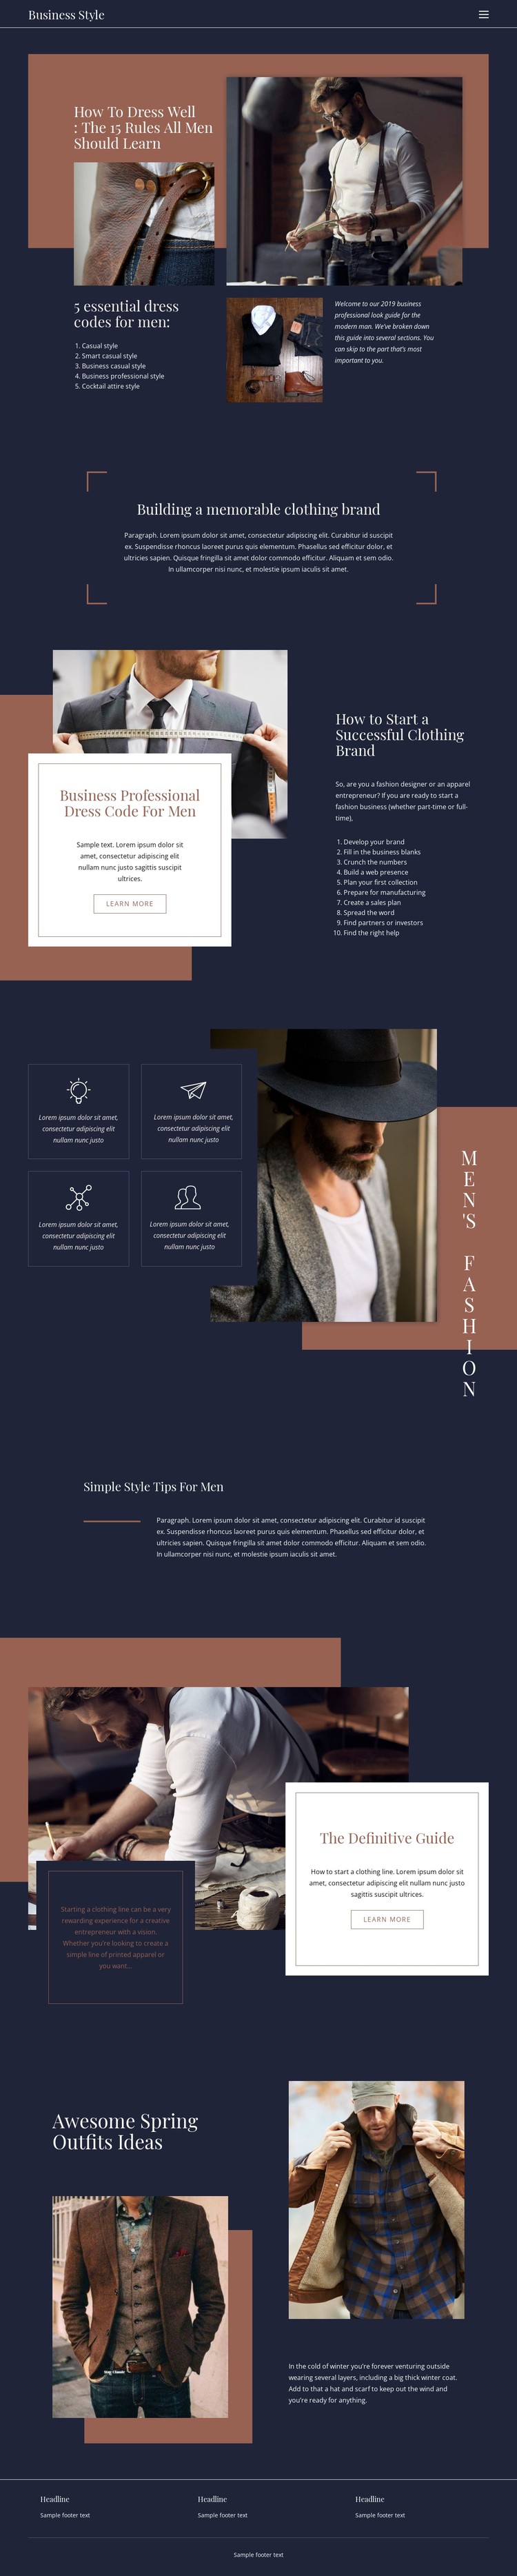 Winning rules of fashion CSS Template